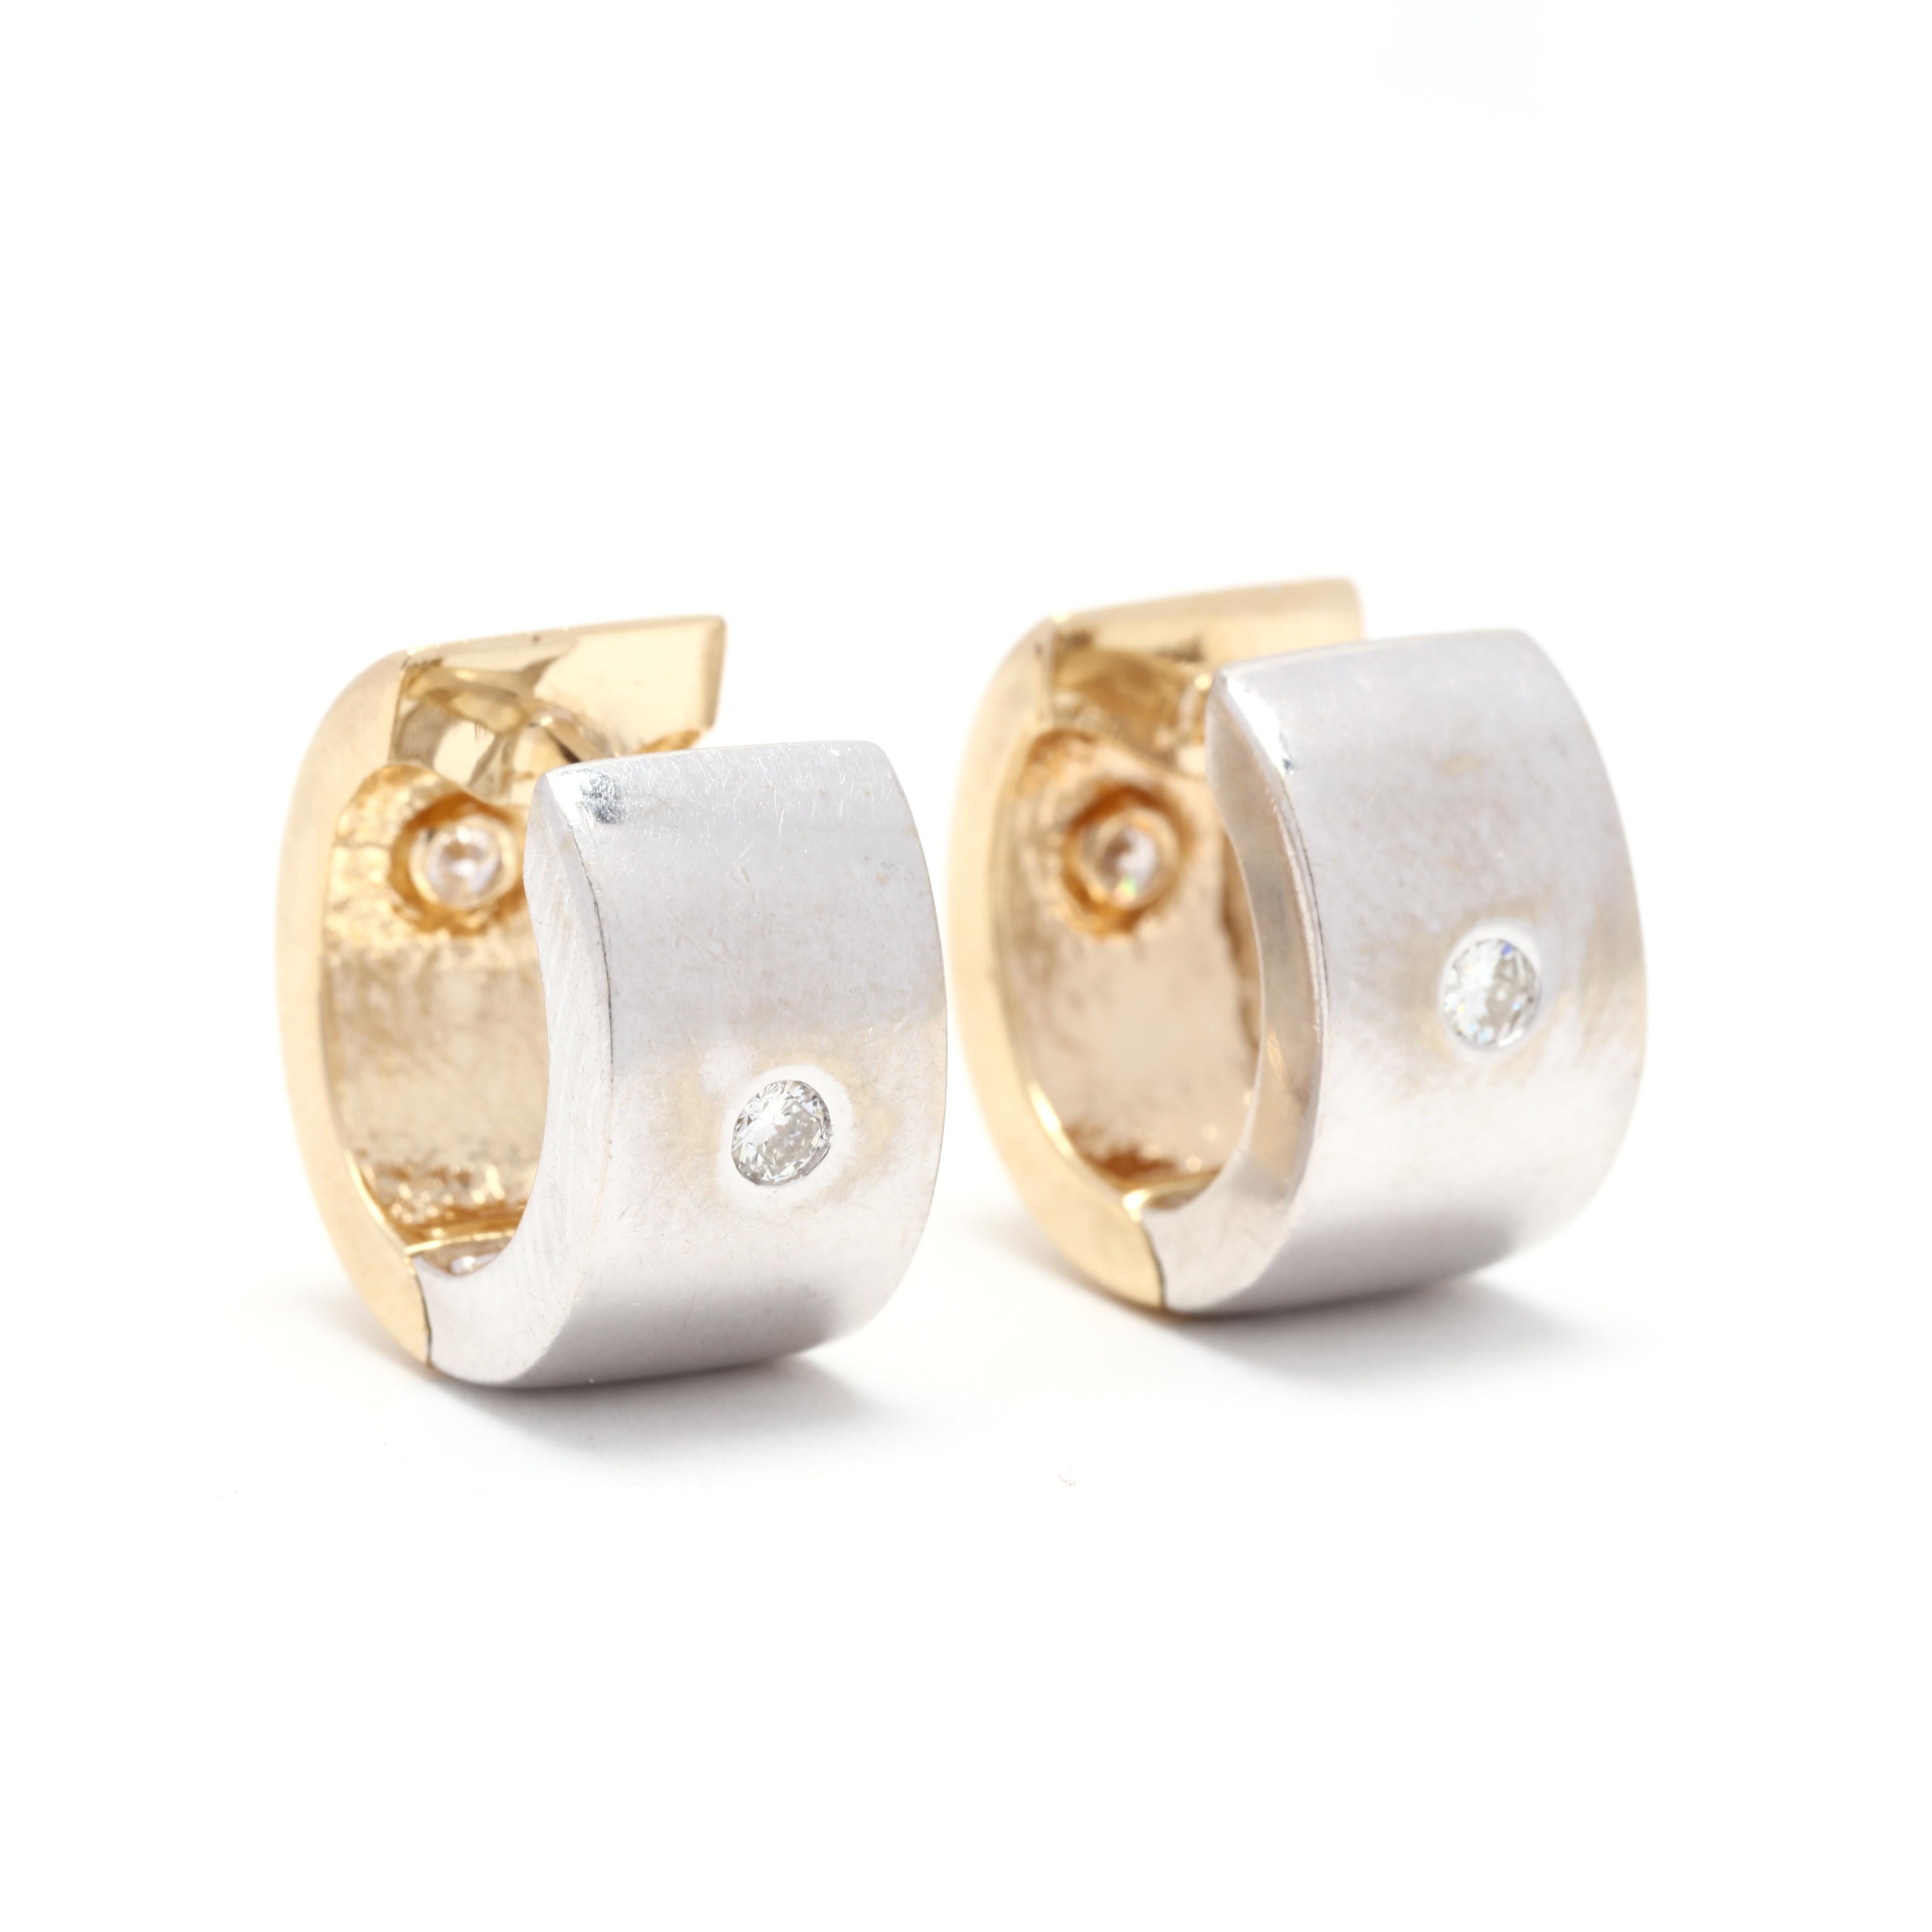 Vintage 14 karat yellow and white gold diamond huggie hoops. These hoops features abi color gold design with each side set with a flush set diamond weighing approximately .16 total carats and with a snap closure.



Stones:

- diamonds, 4 stones

-